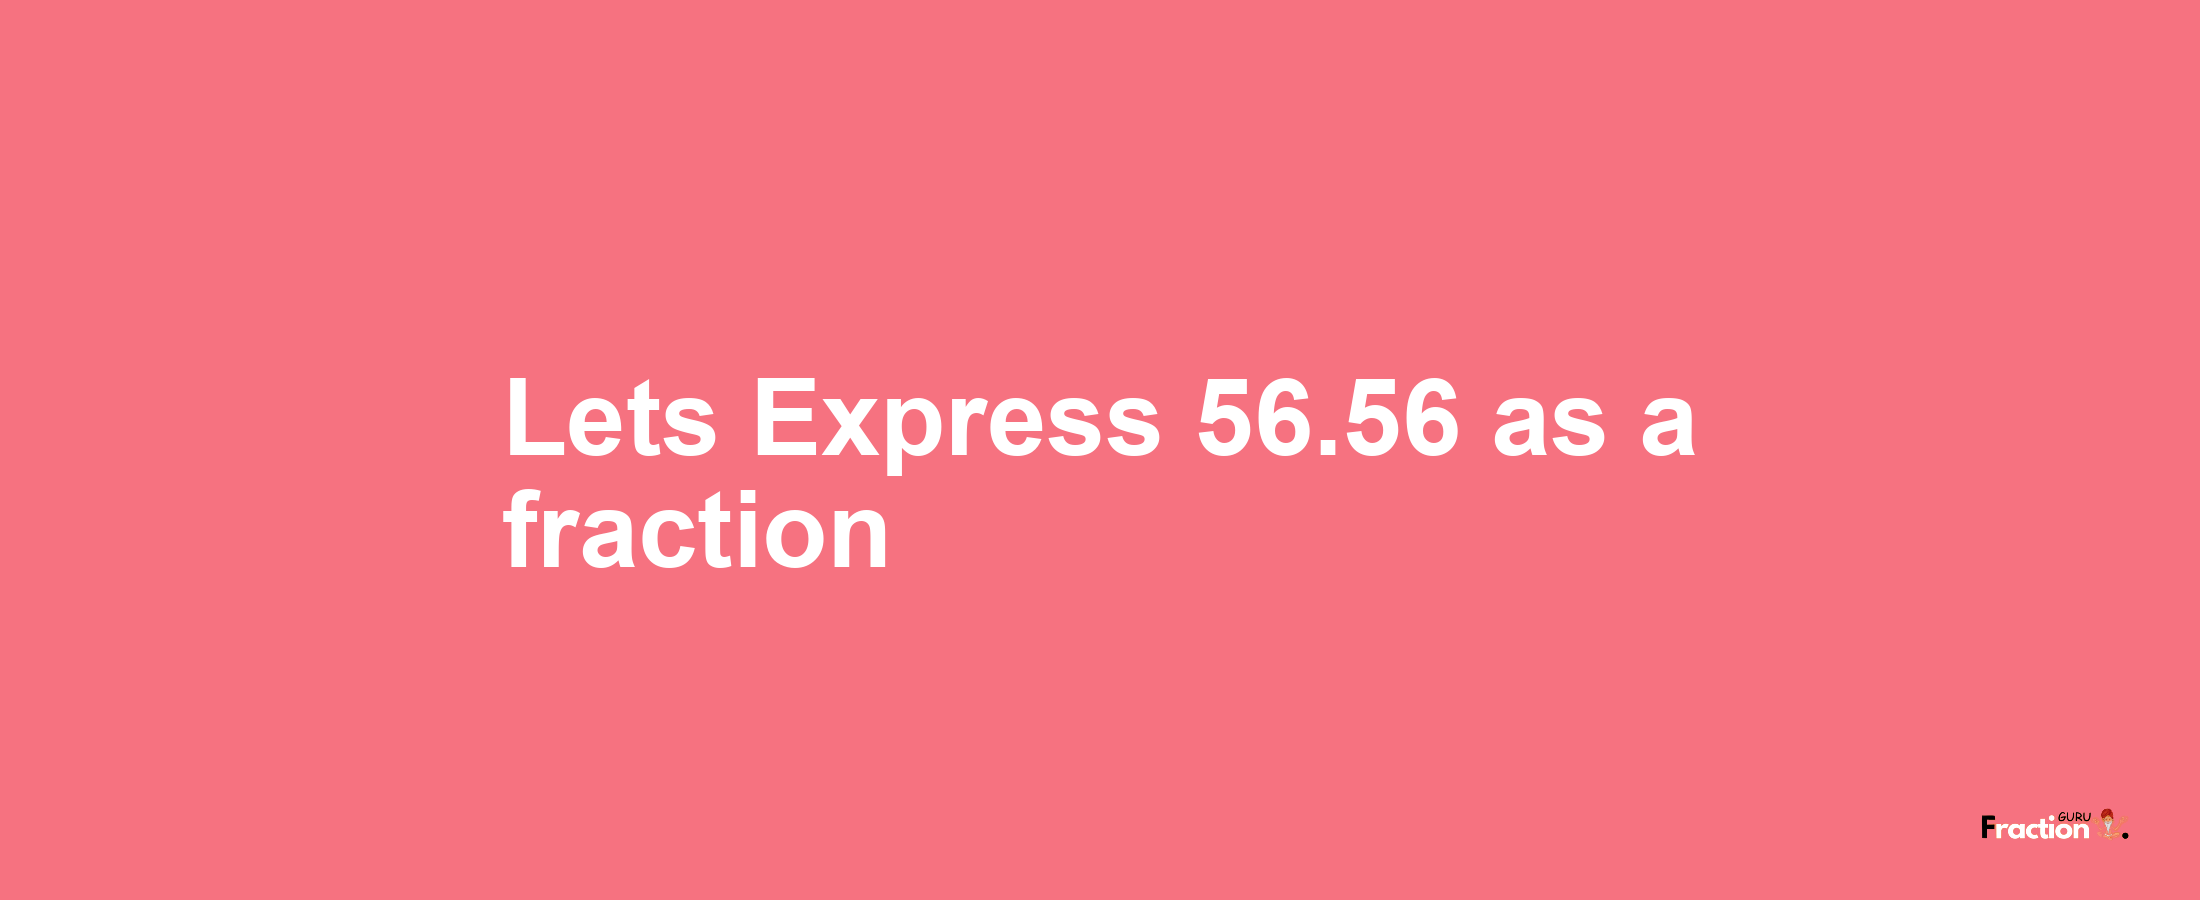 Lets Express 56.56 as afraction